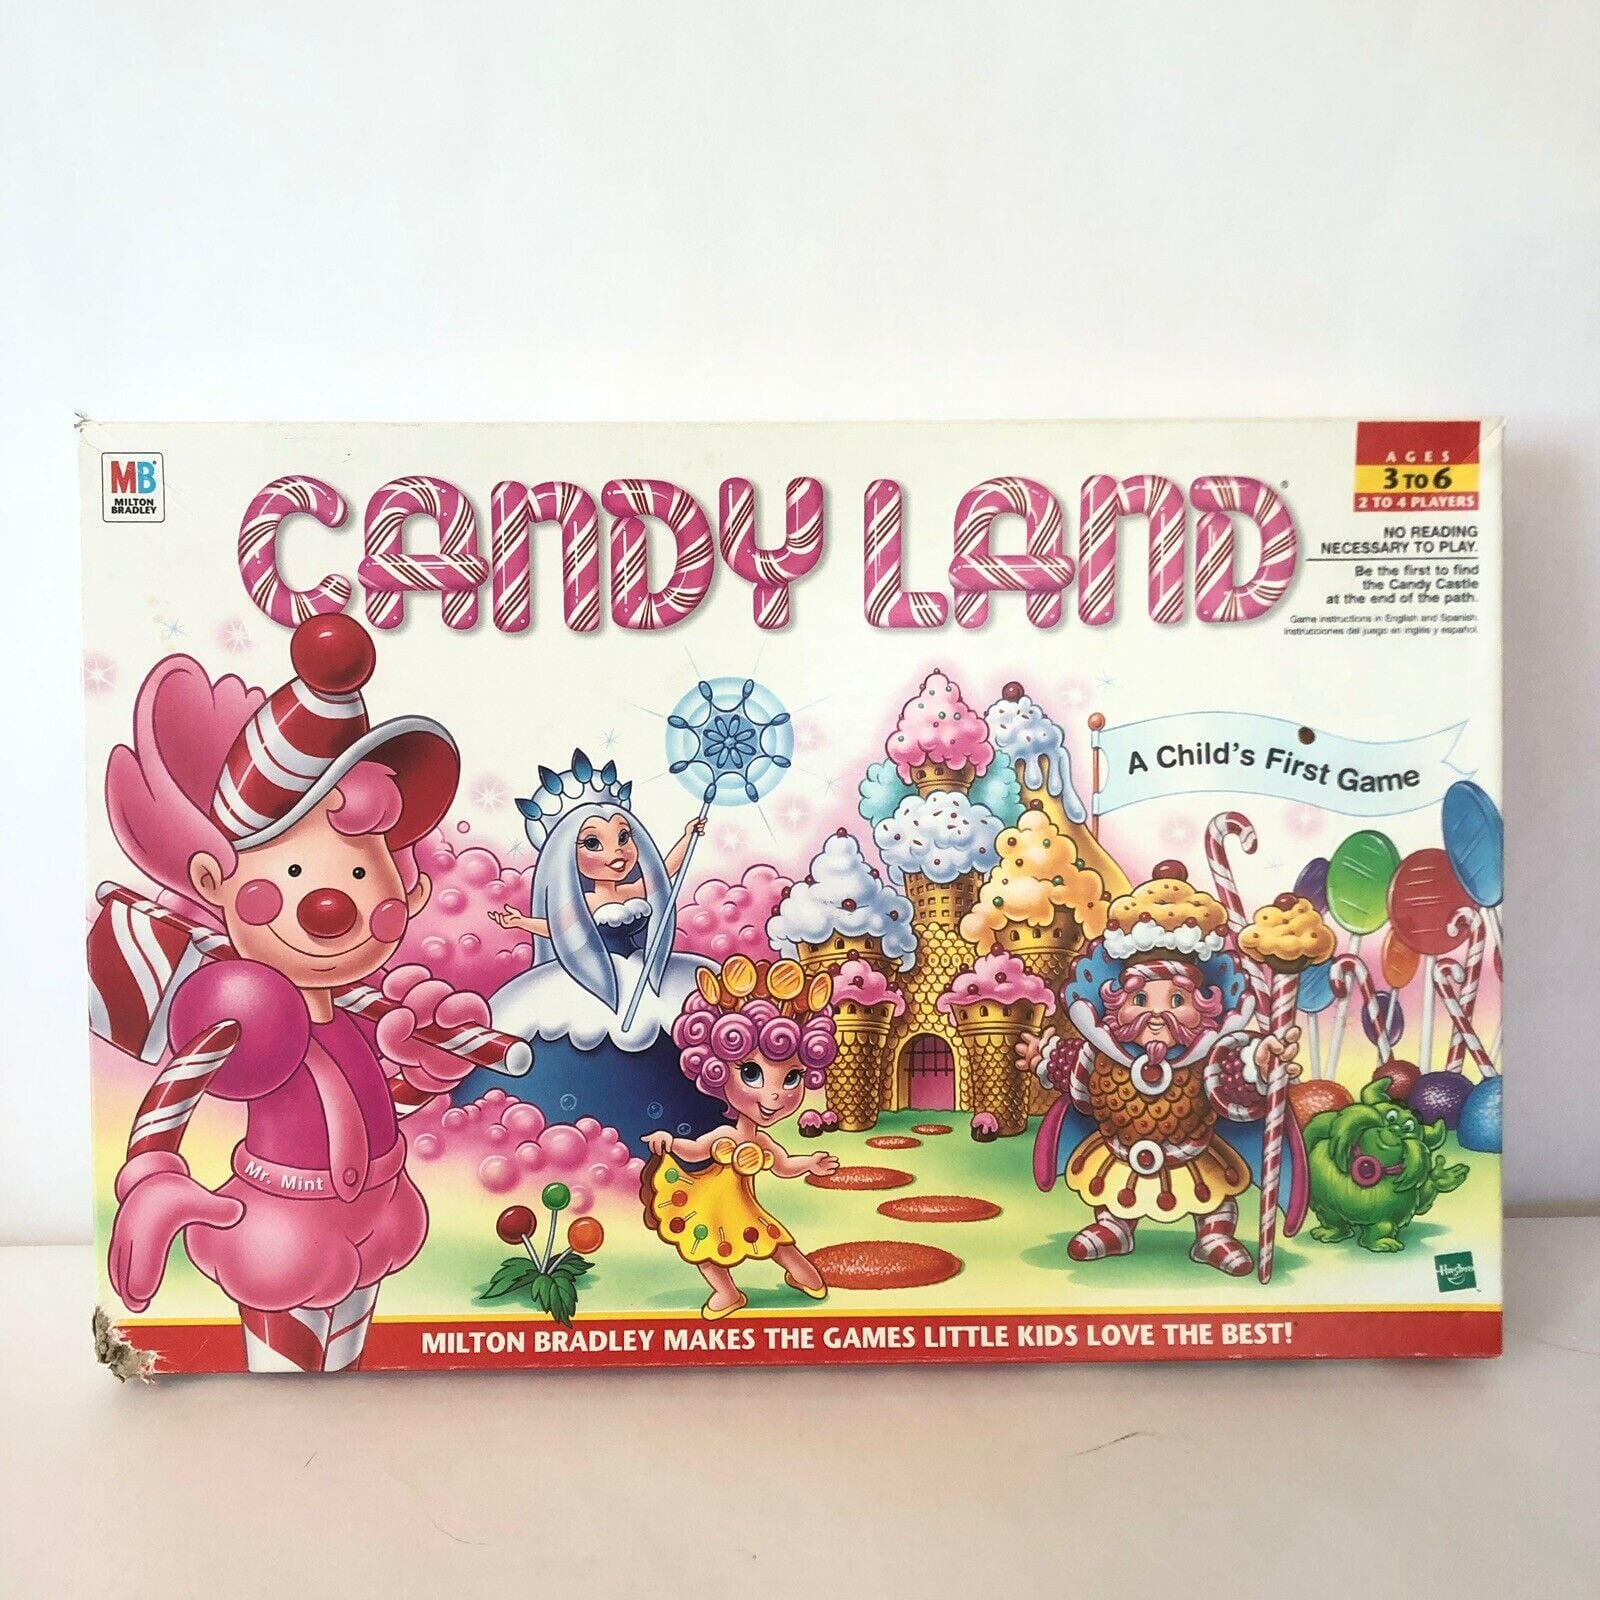 candyland characters 1980s